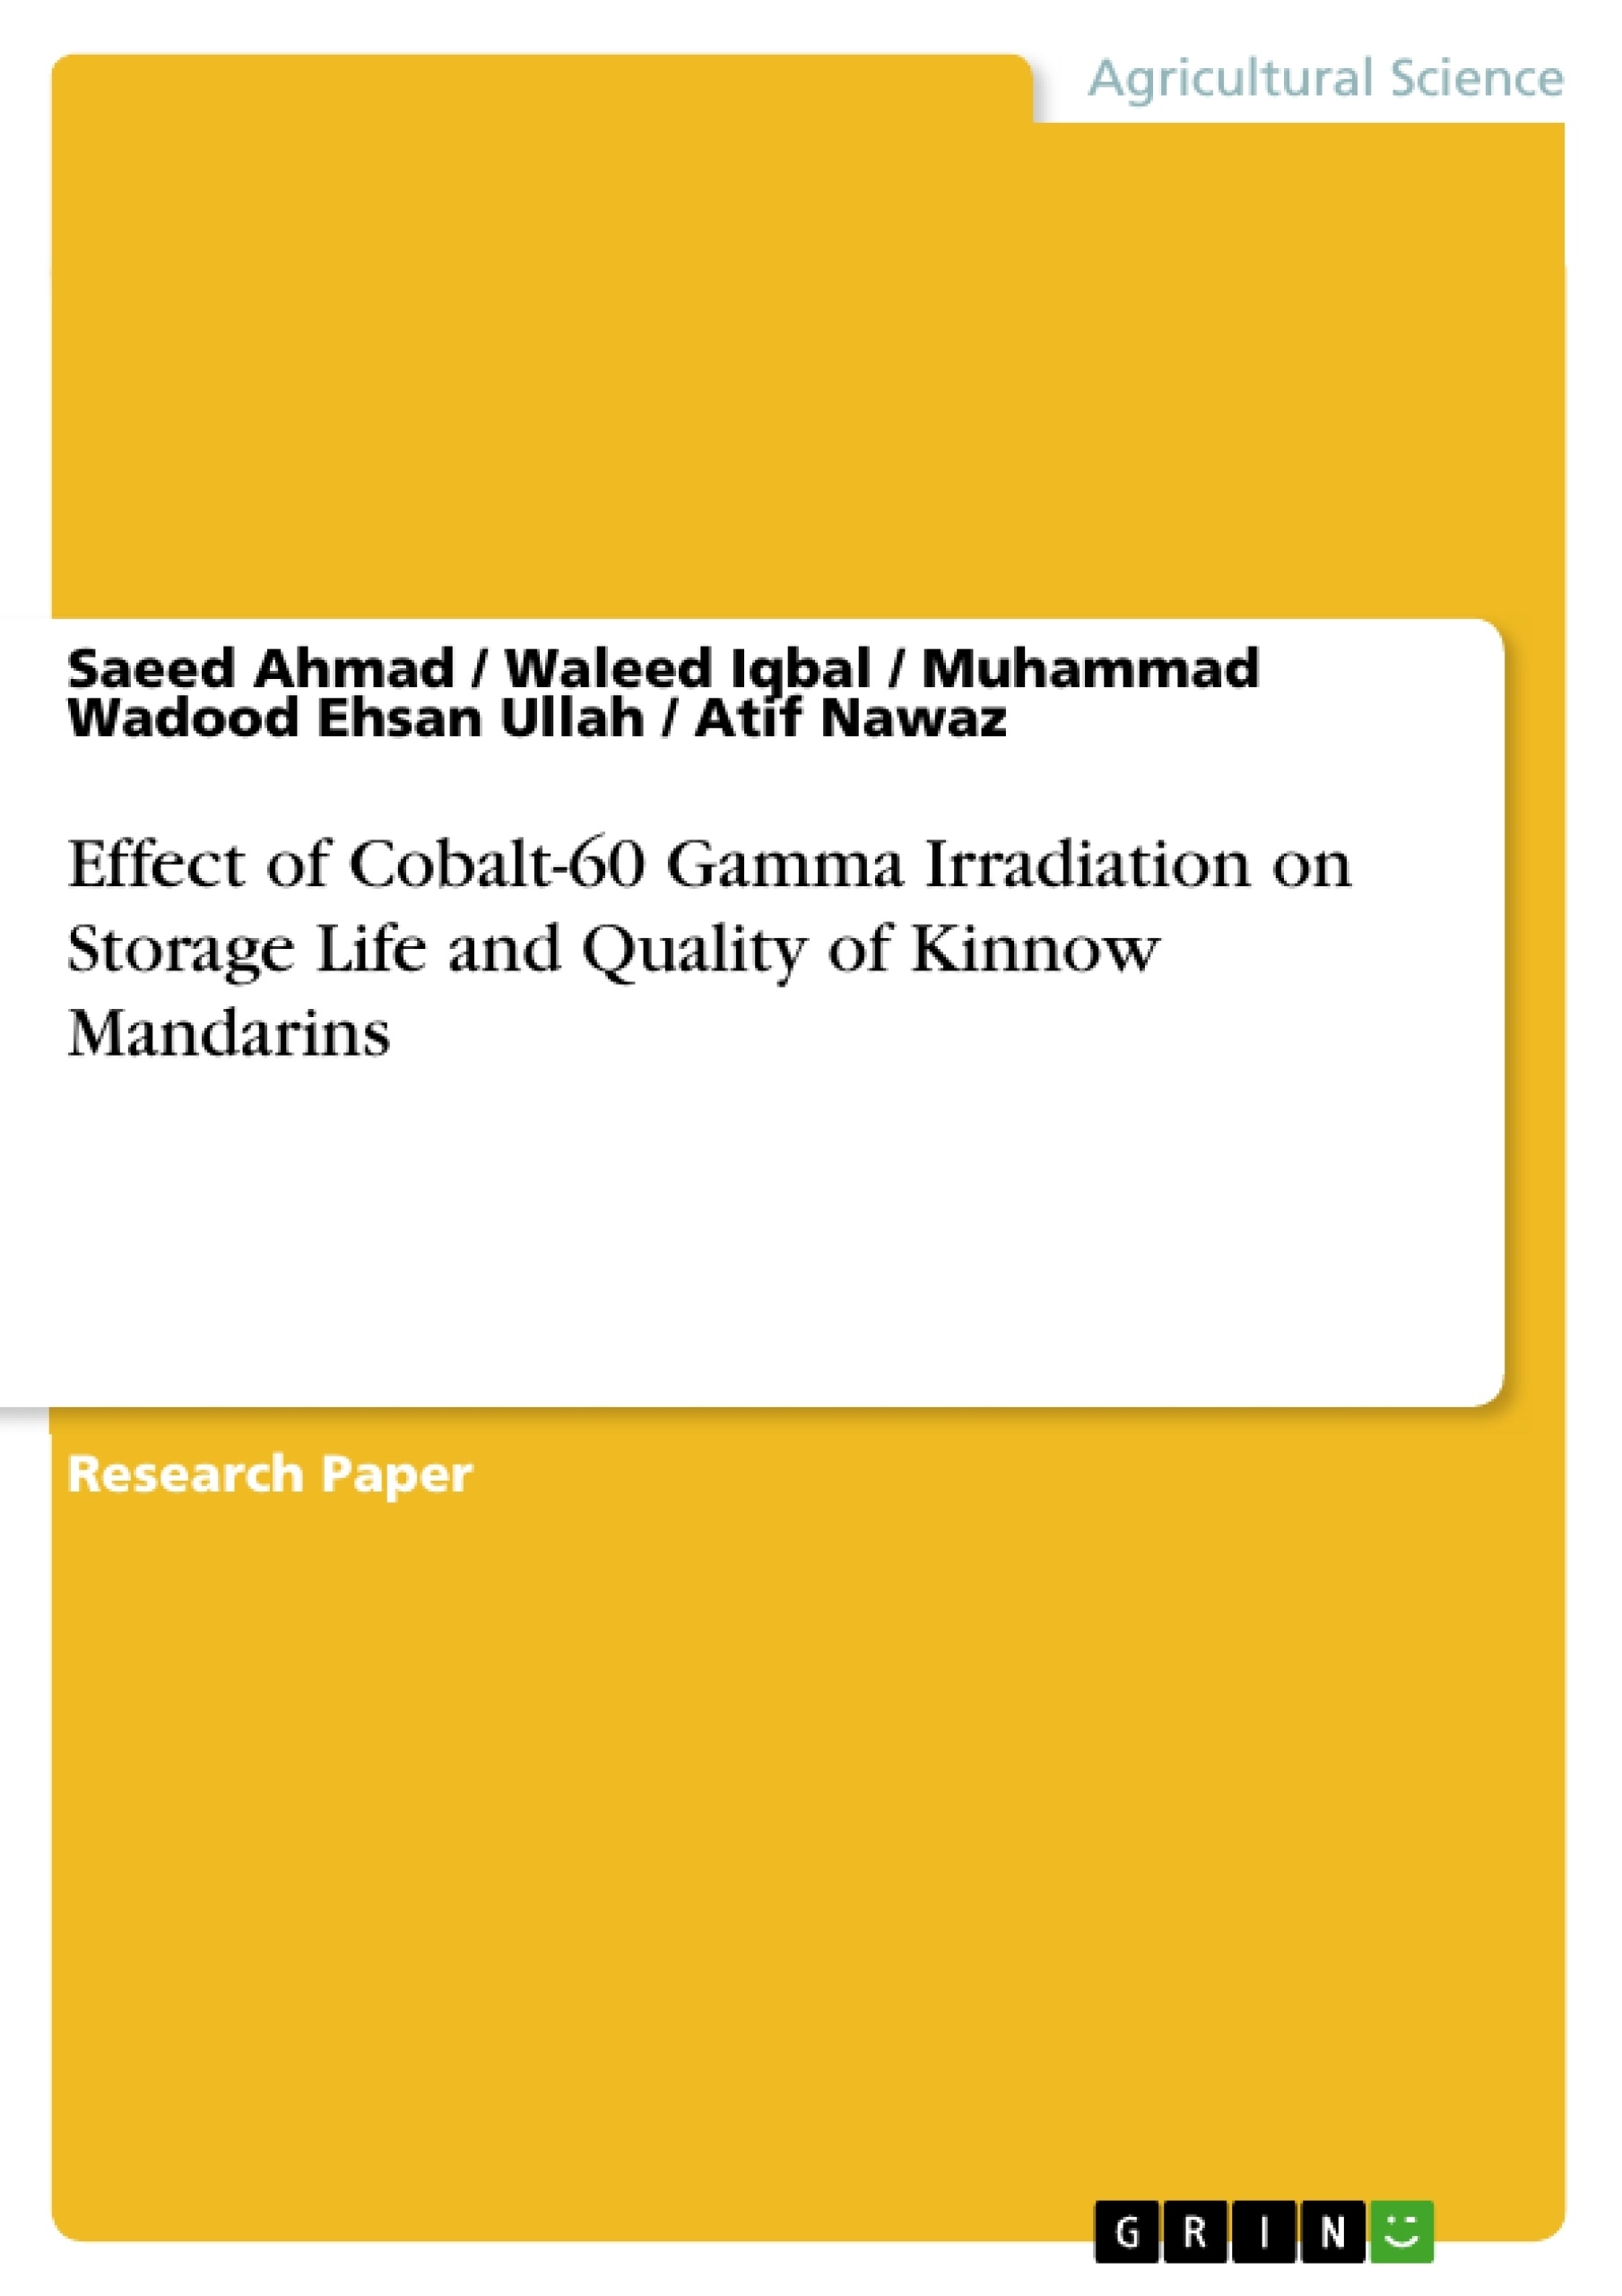 Title: Effect of Cobalt-60 Gamma Irradiation on Storage Life and Quality of Kinnow Mandarins